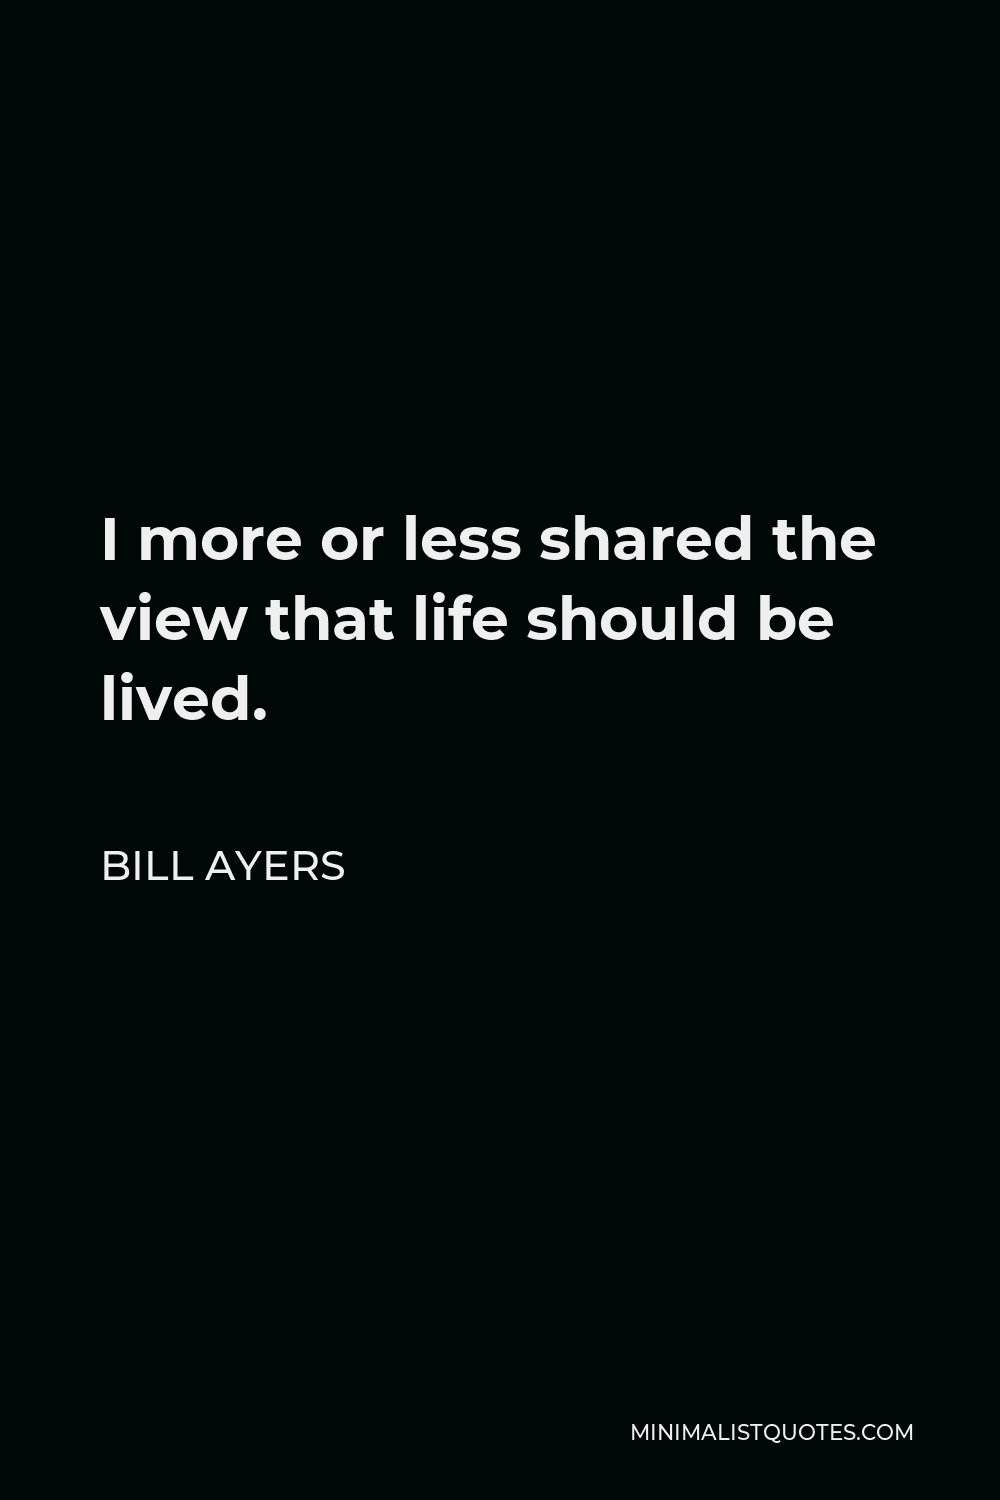 Bill Ayers Quote - I more or less shared the view that life should be lived.